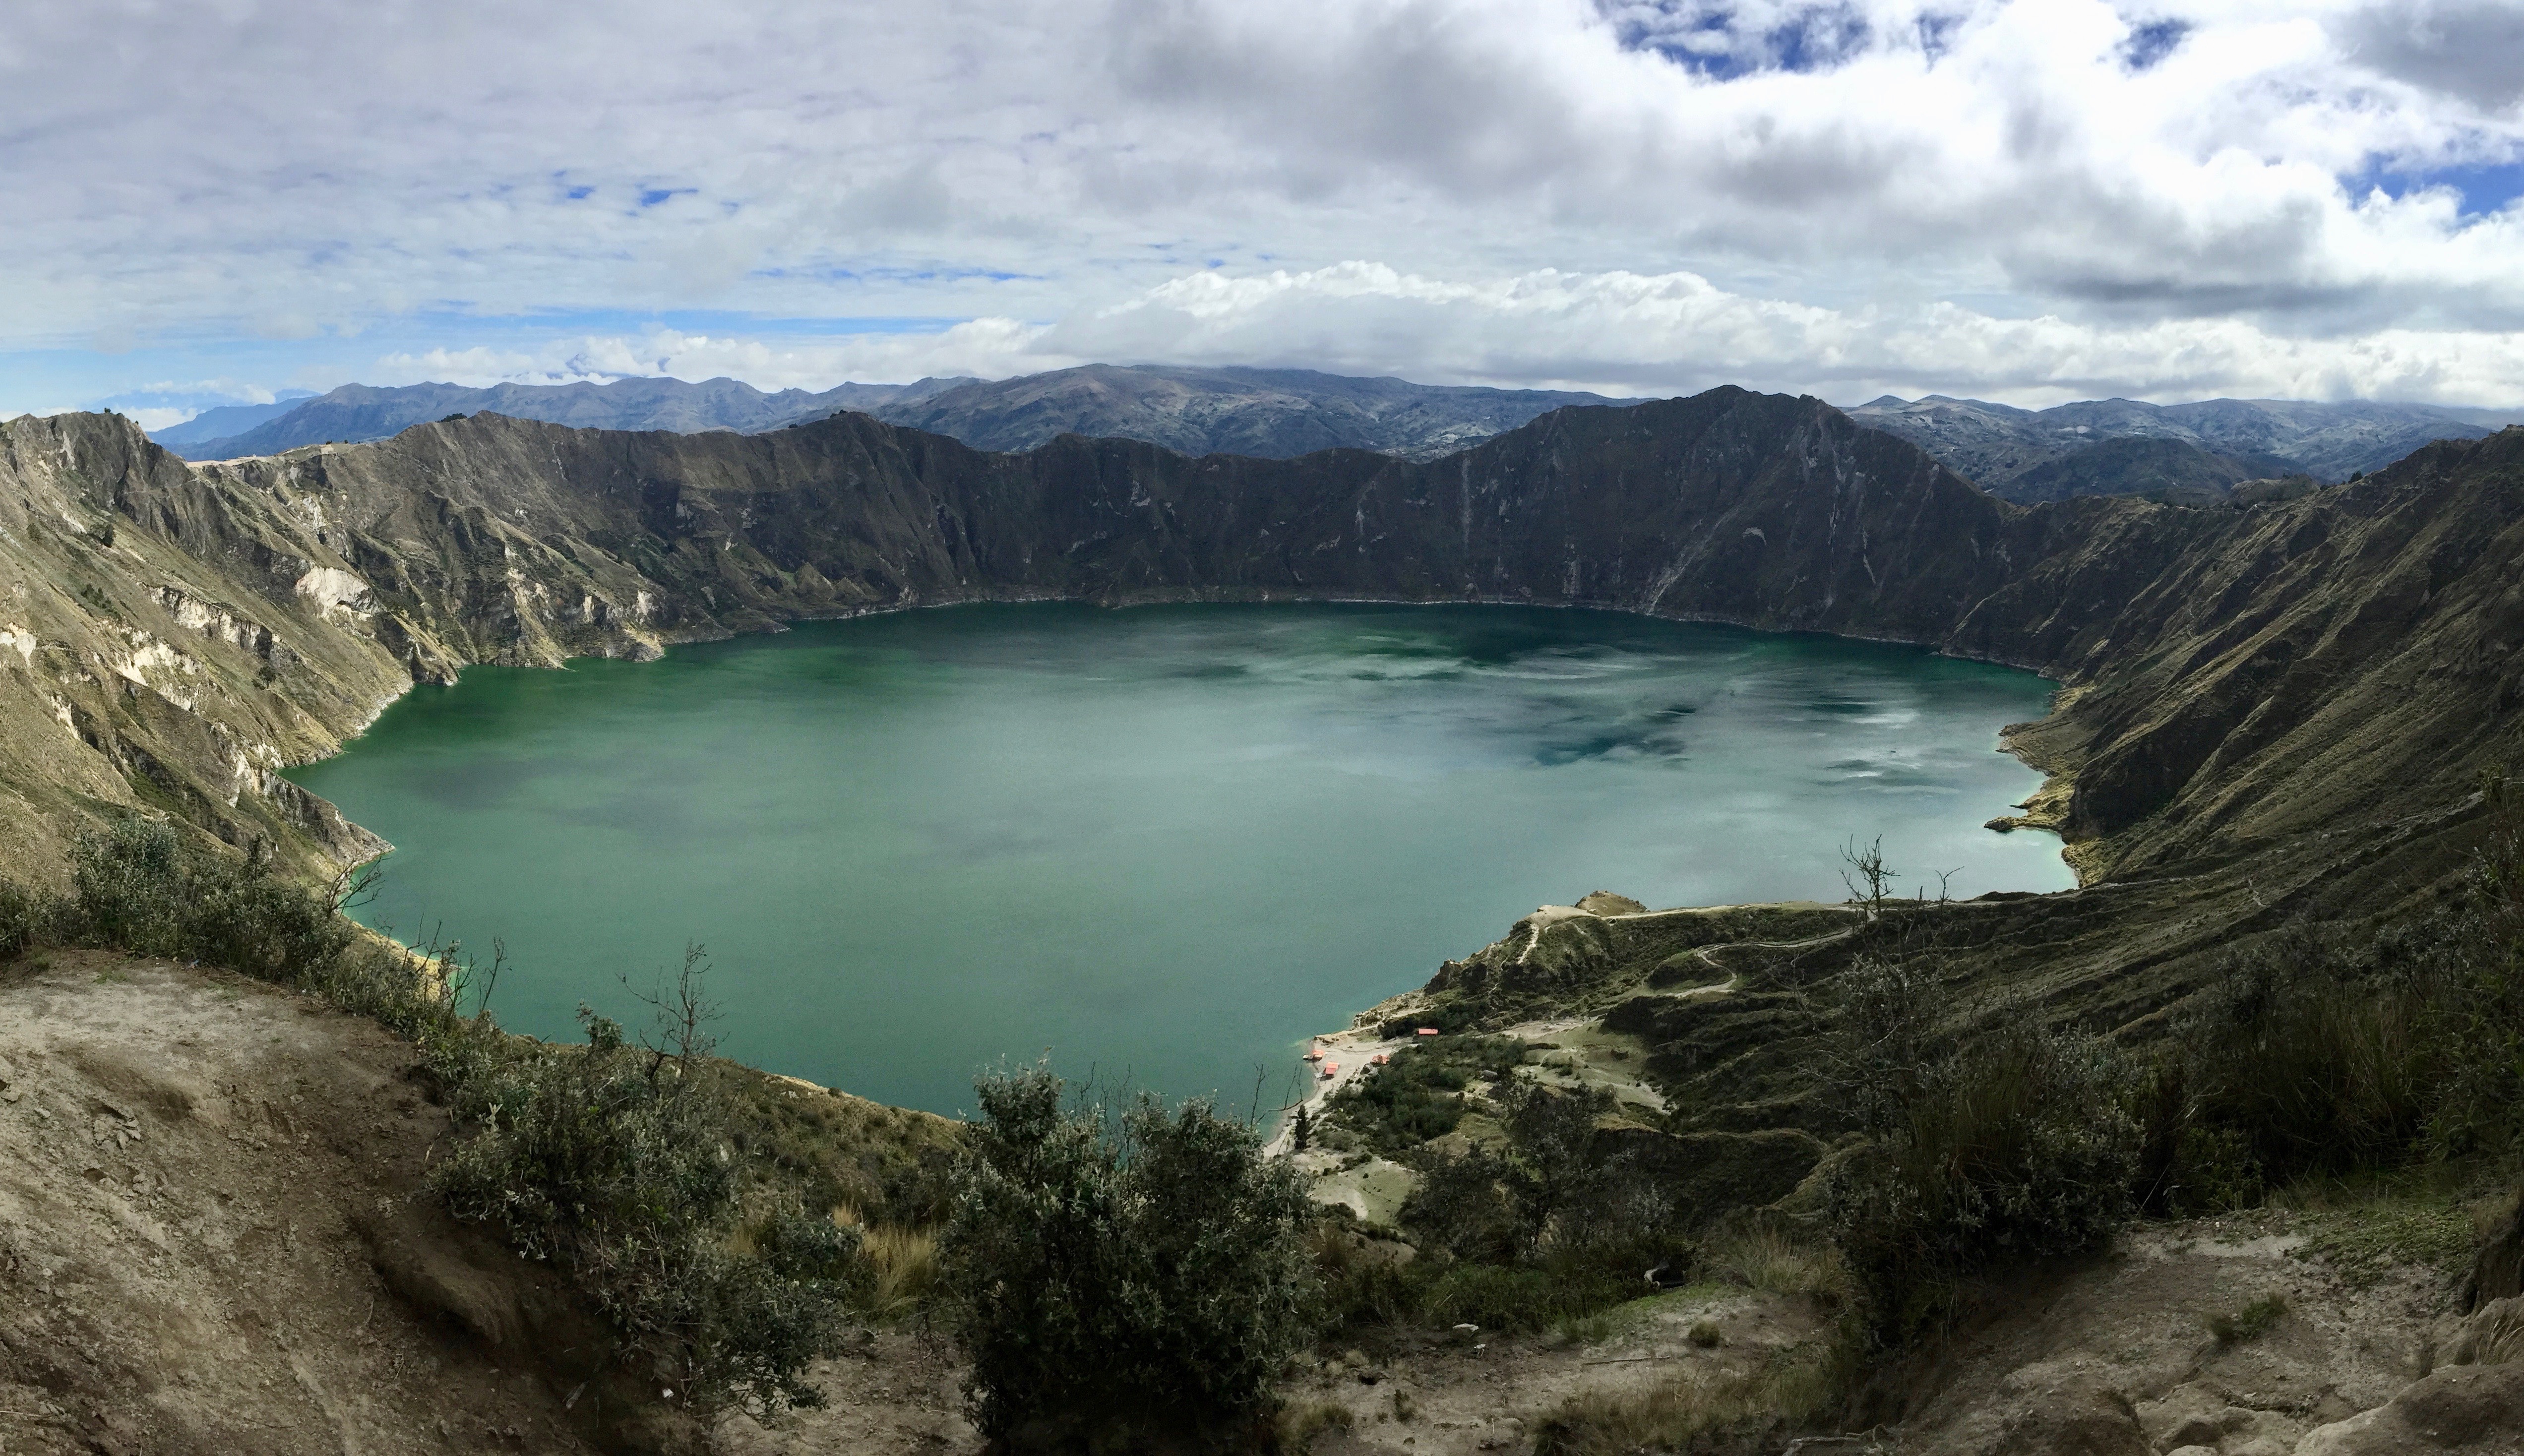 Blue green Quilotoa crater lake in grey green Andean mountains